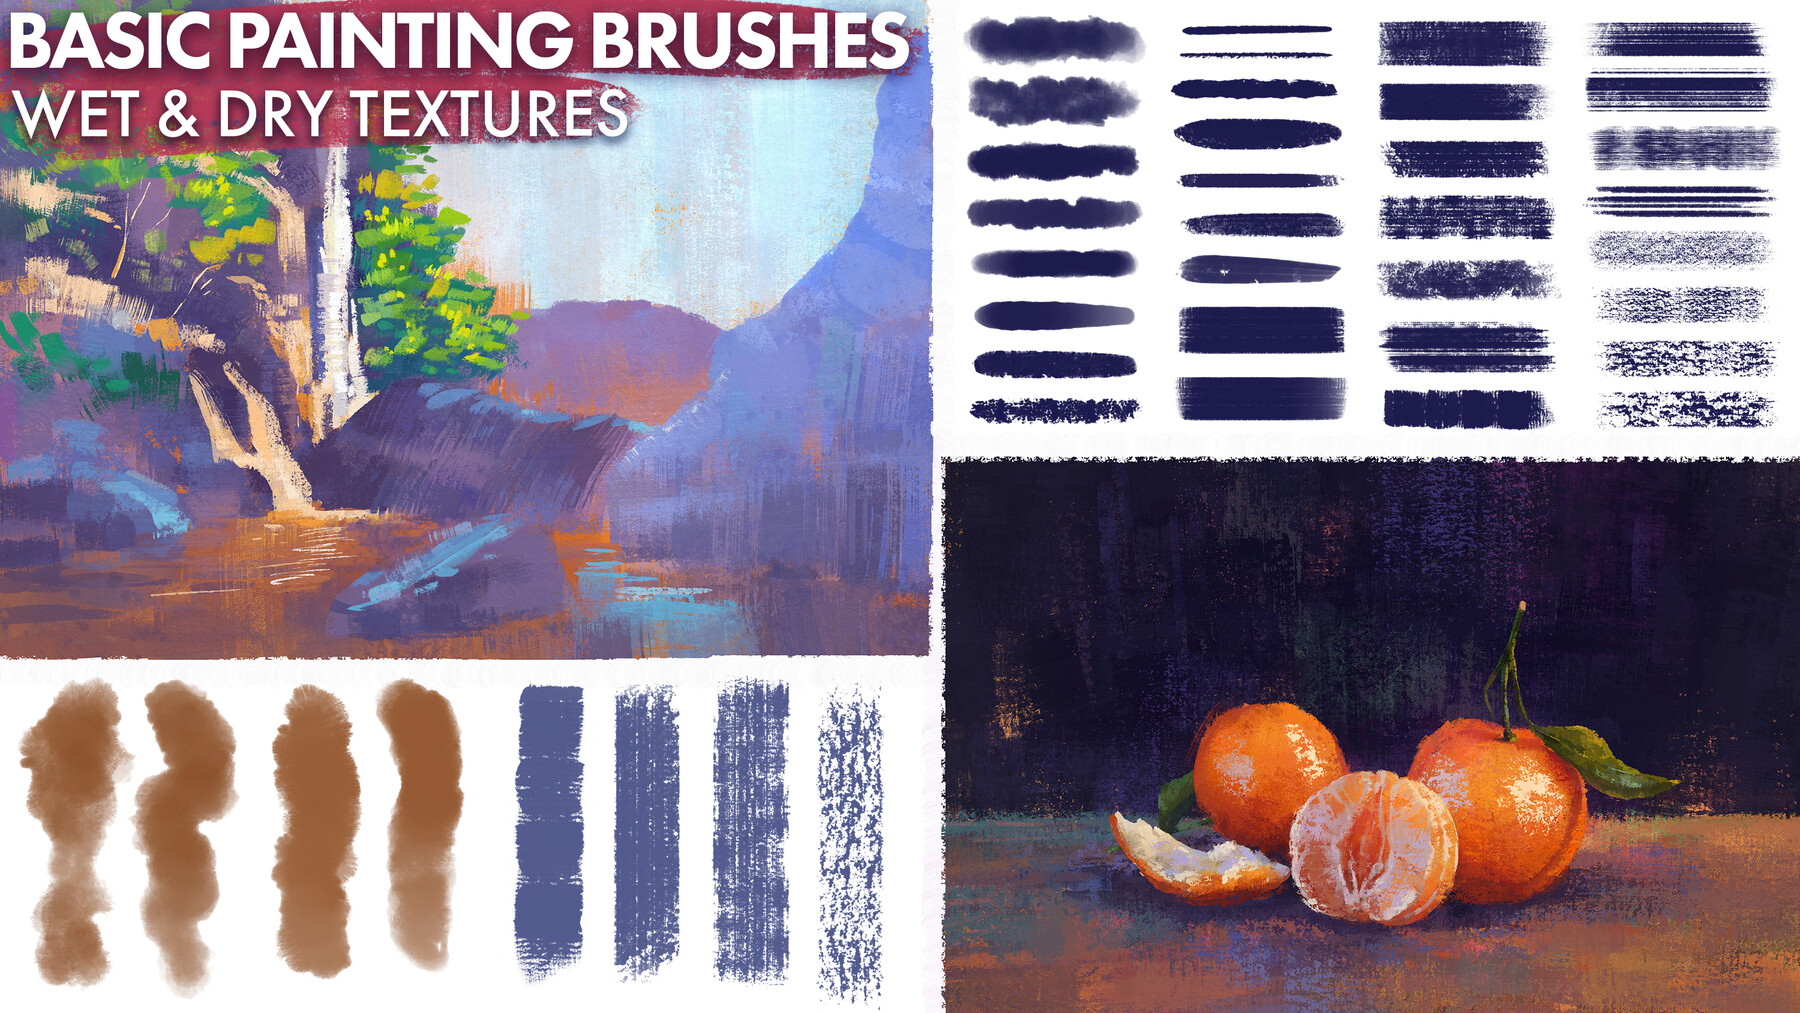 Hand-painted Gouache Brushes for Photoshop and Procreate